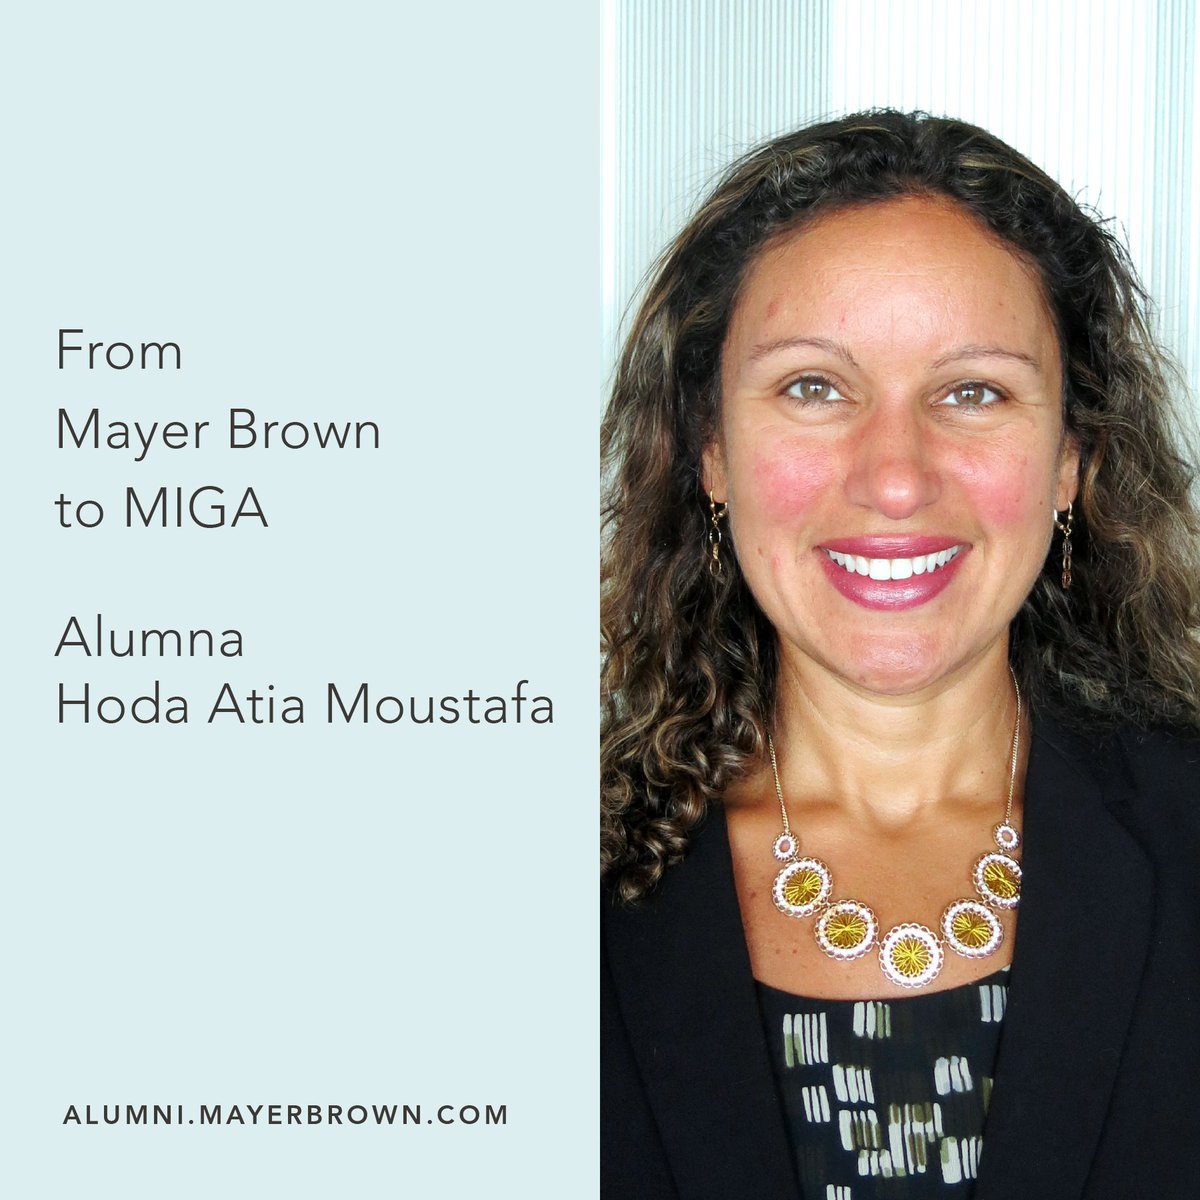 As global head of portfolio management at @MIGA, Mayer Brown alumna Hoda Atia Moustafa finds herself liaising with high-level government officials and has helped bring energy security to Djibouti, a tiny country in the Horn of Africa. bit.ly/3PFZPd5 #MayerBrownAlumni